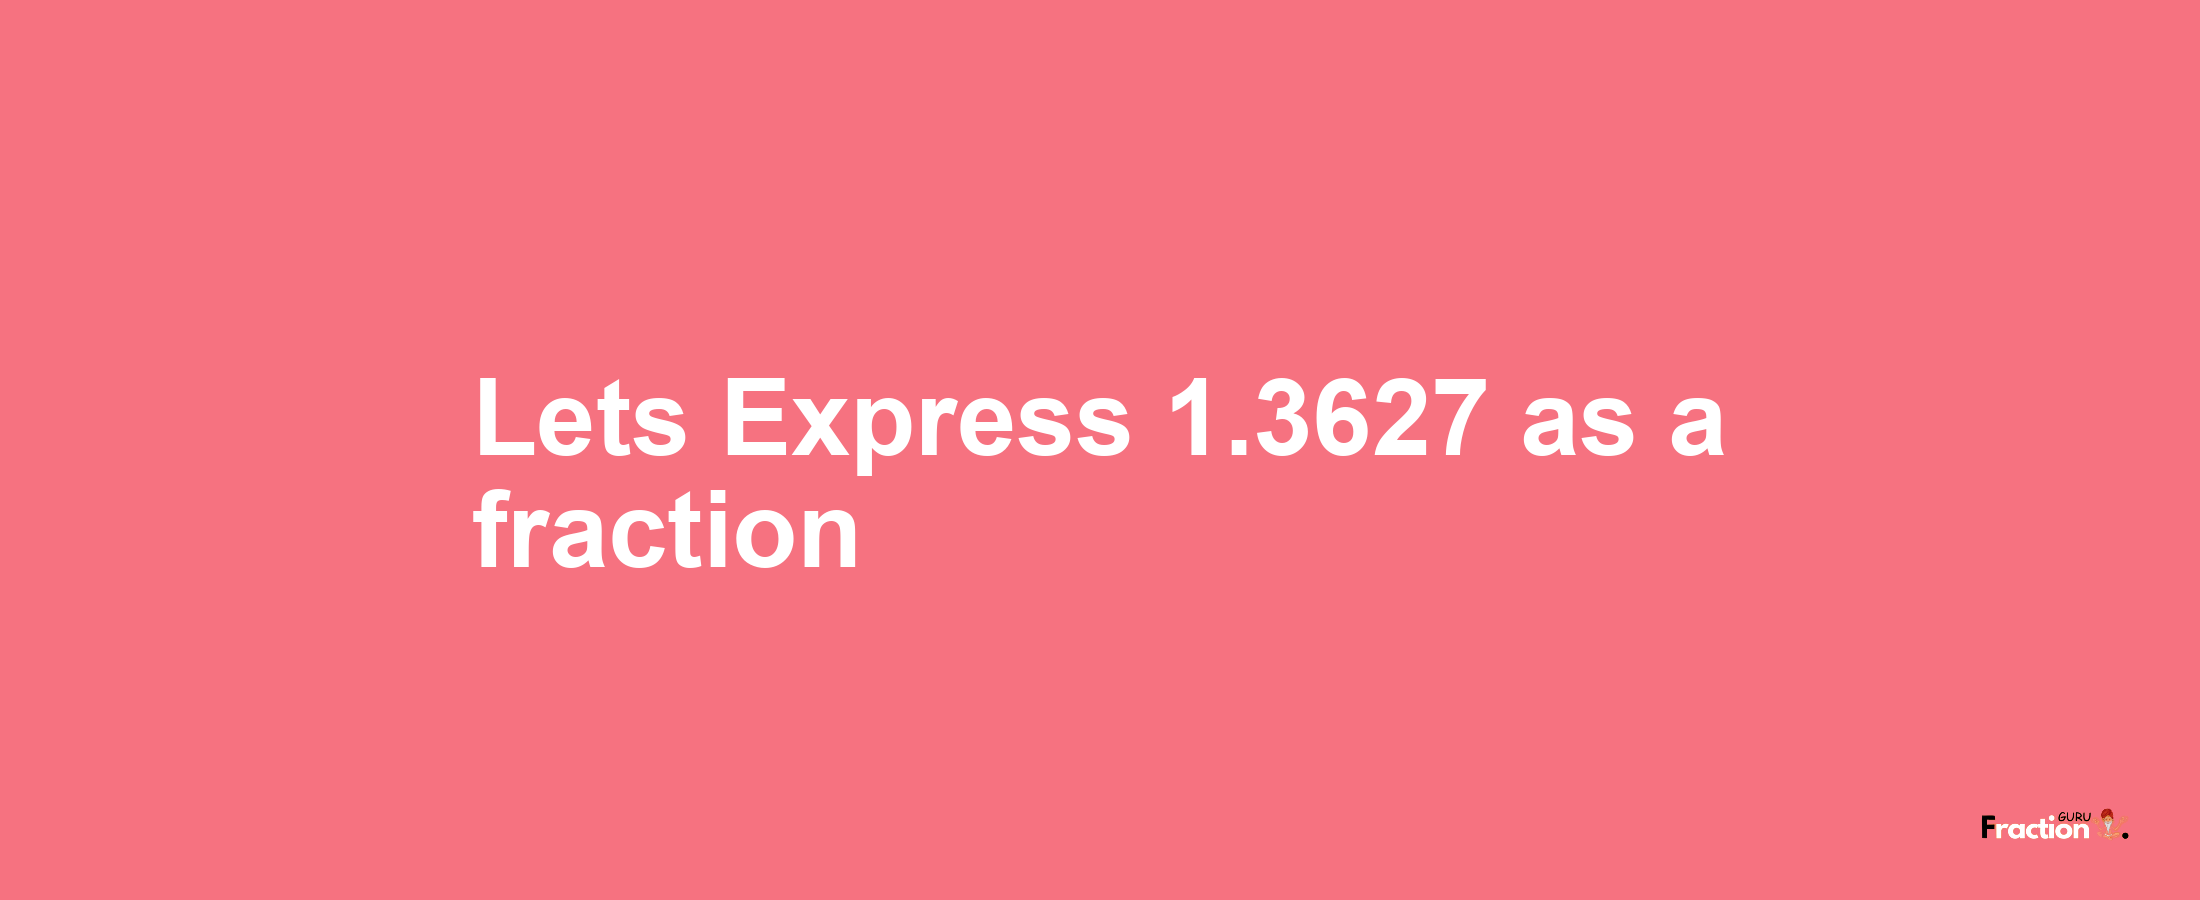 Lets Express 1.3627 as afraction